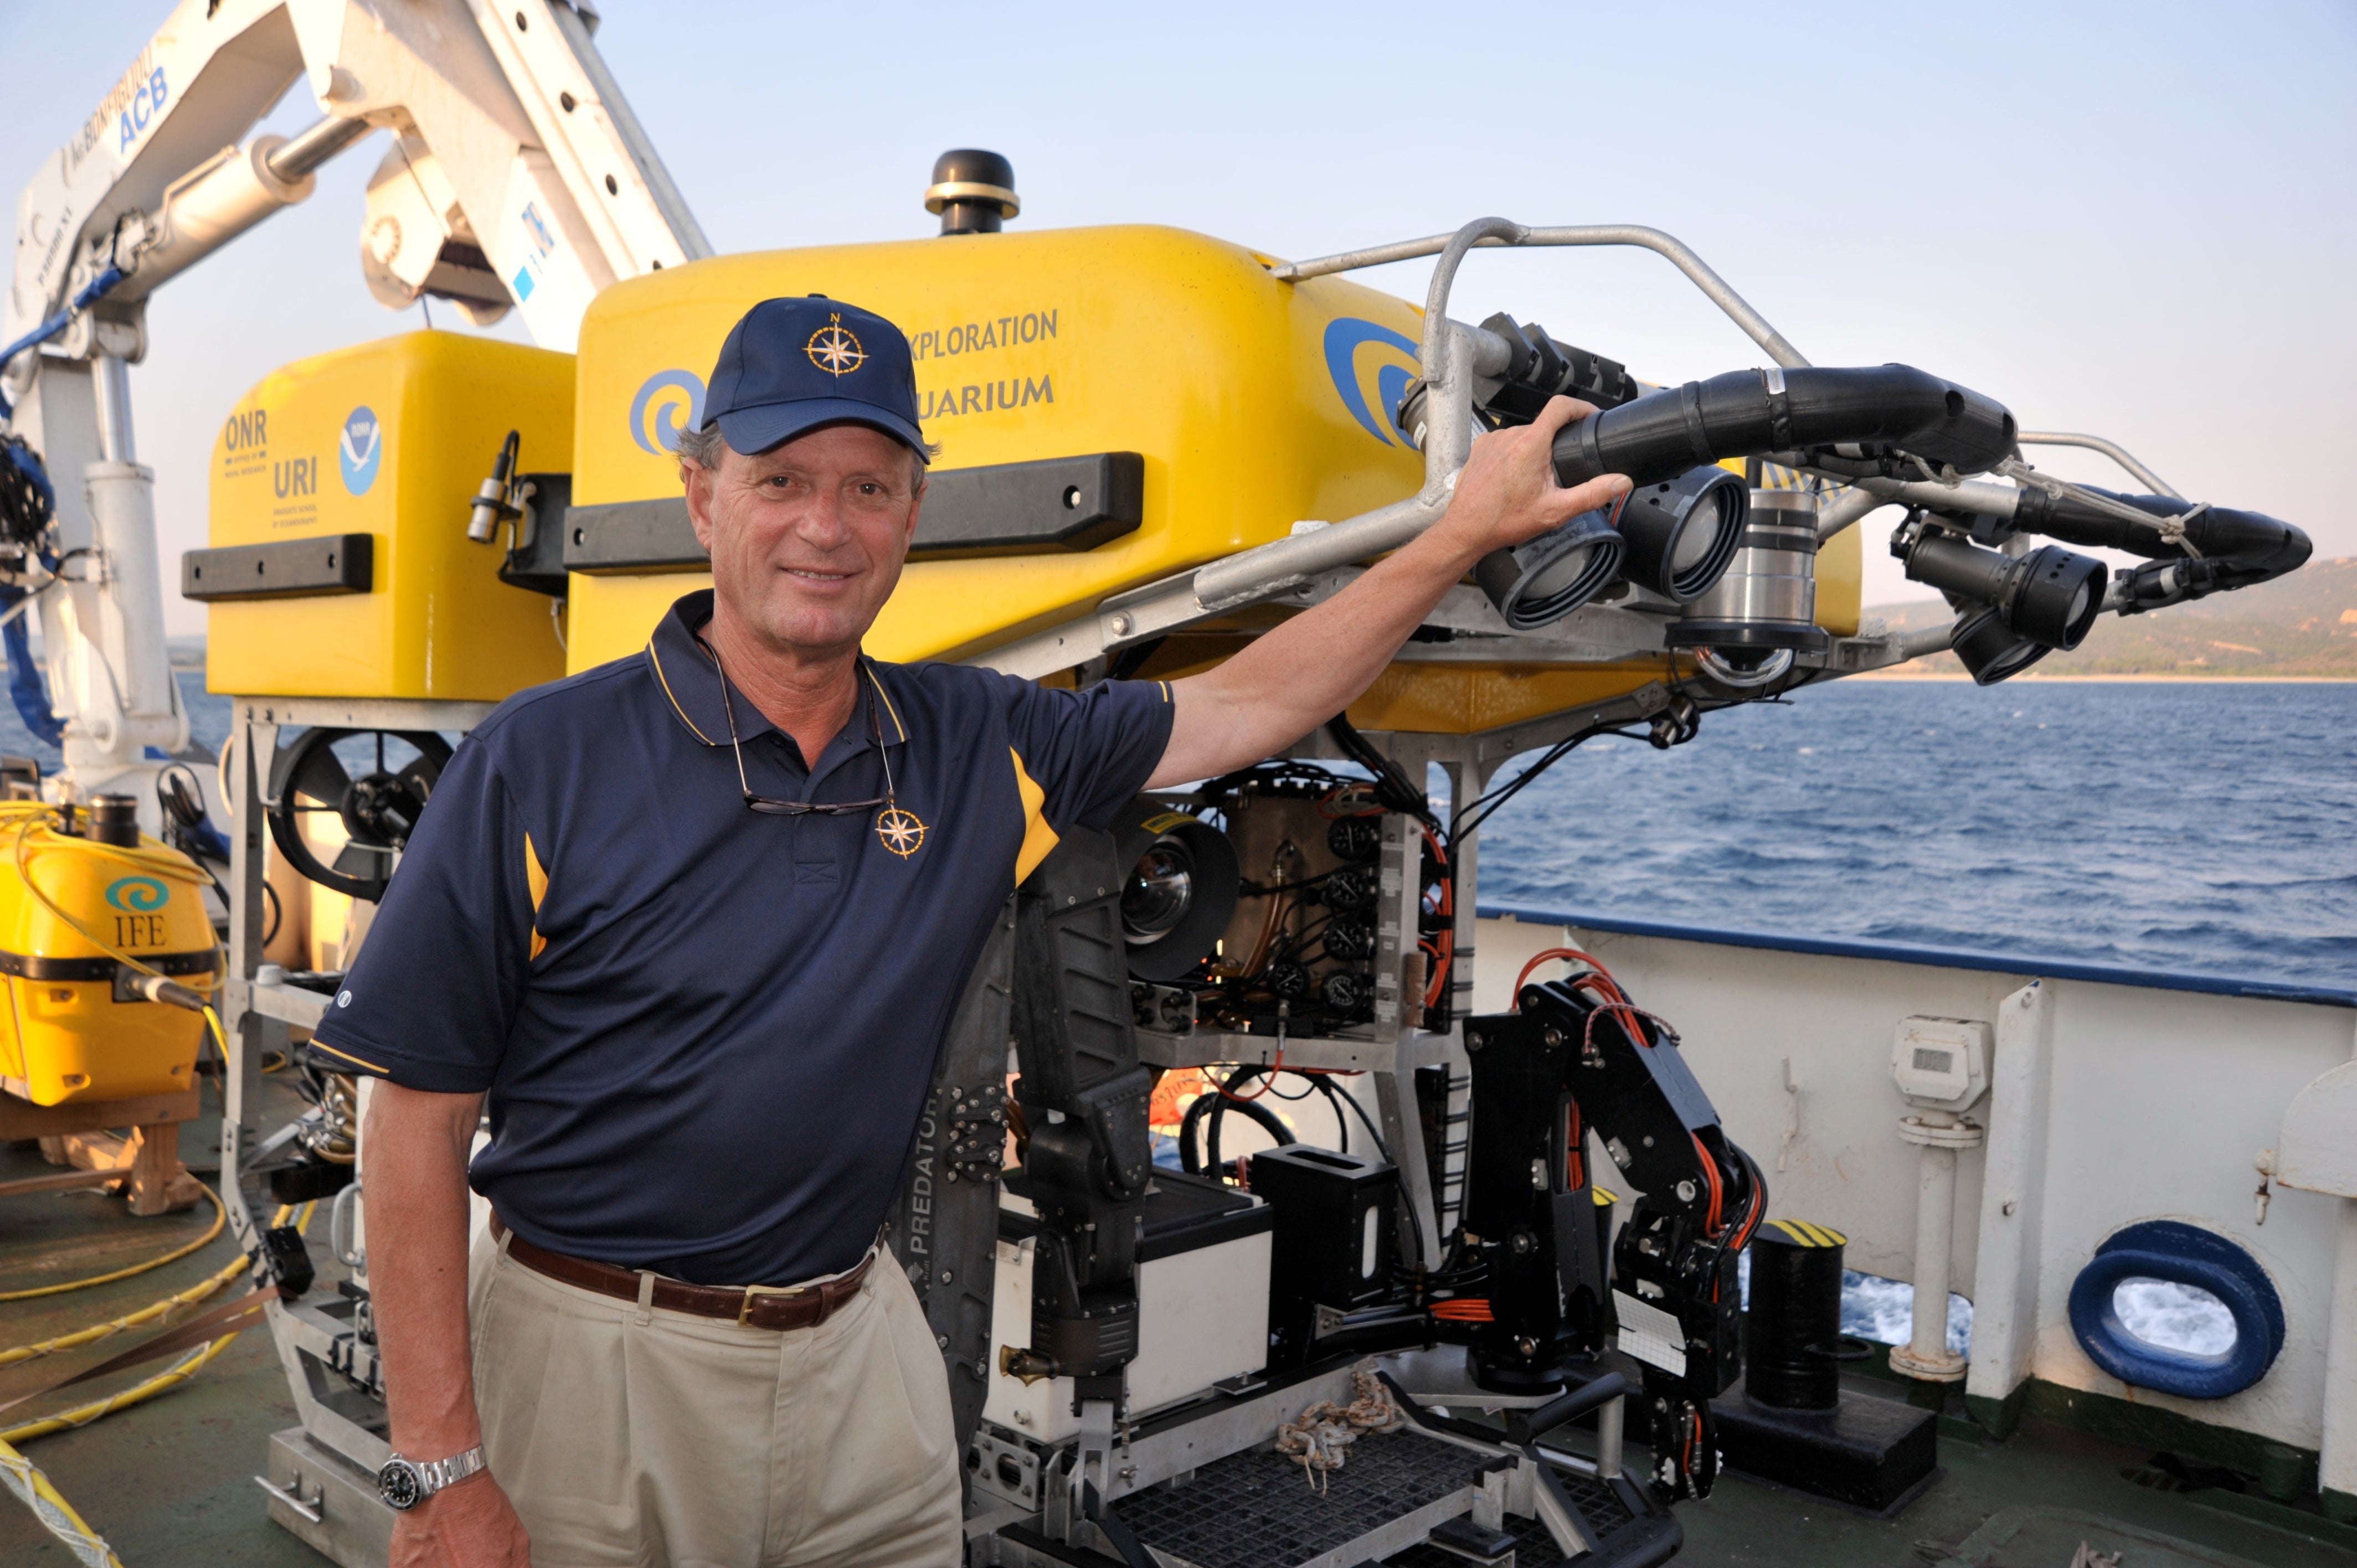 Robert Ballard standing next to a remotely operated vehicle (ROV) aboard E/V Nautilus.